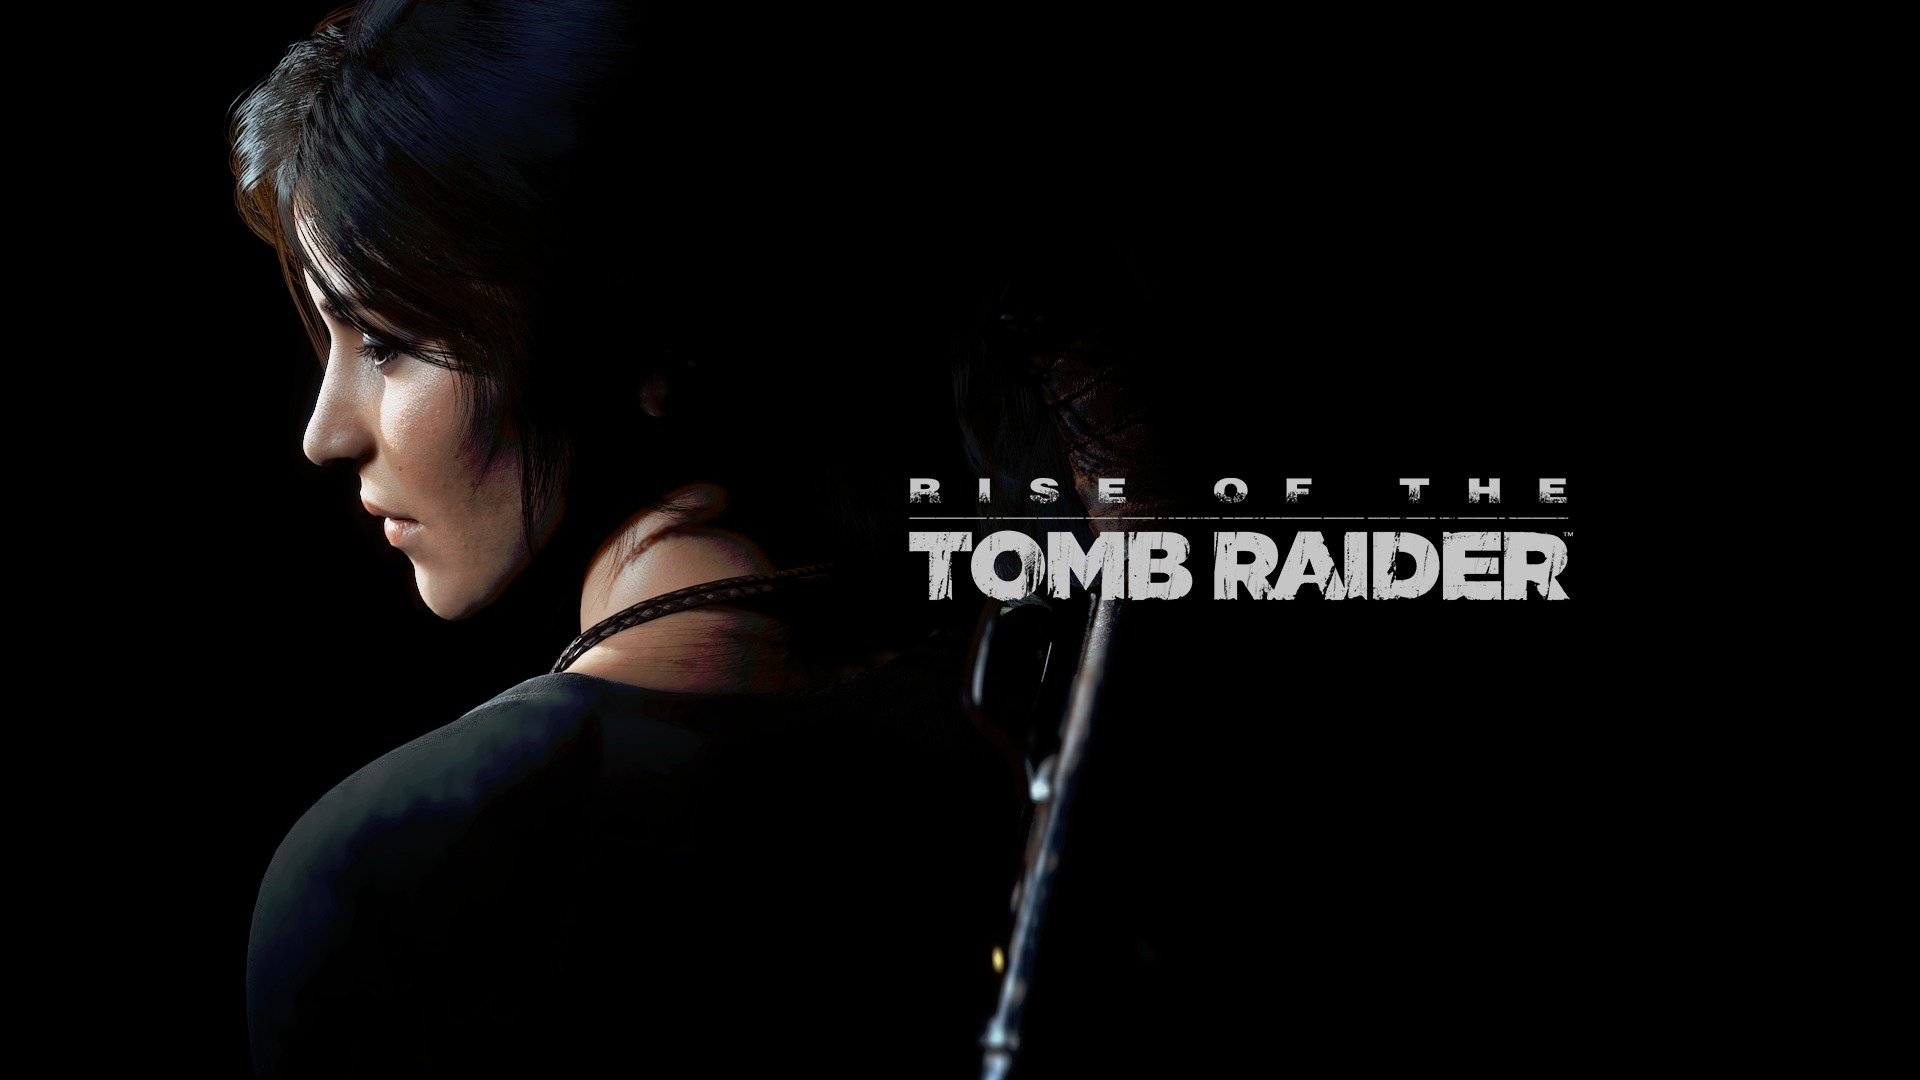 1920x1080 Rise Of The Tomb Raider Wallpaper Background Image. 